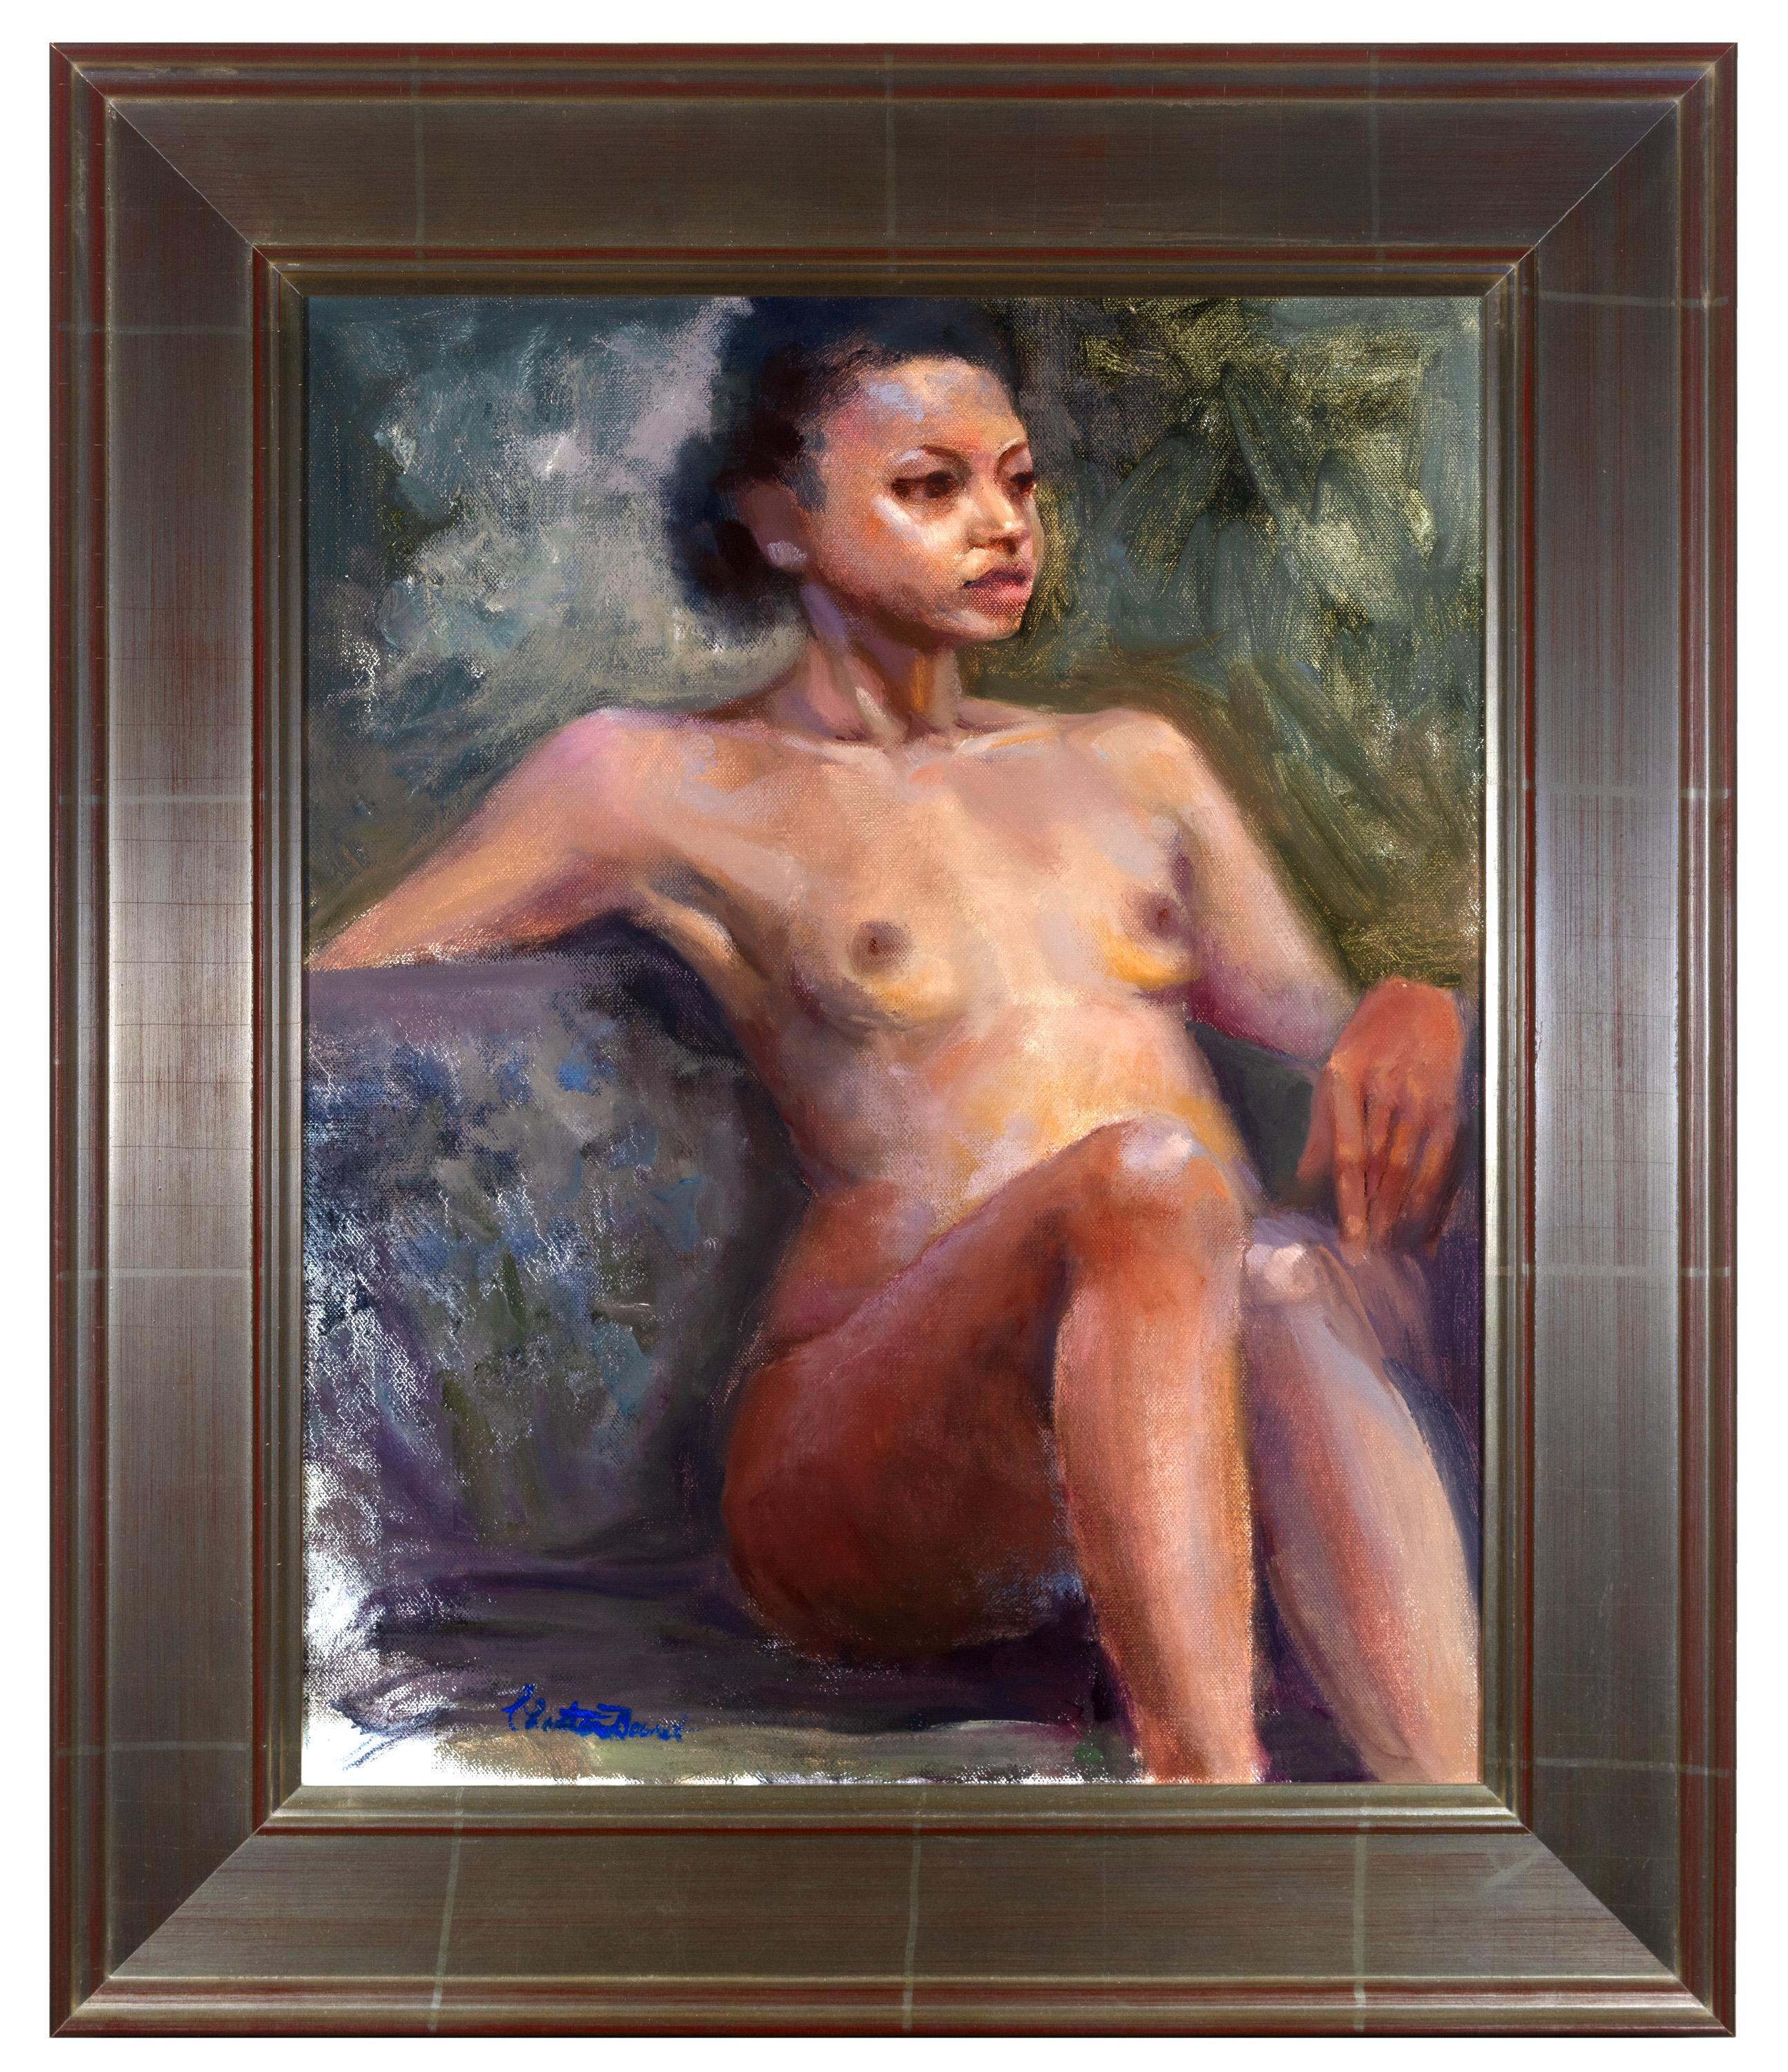 Christiane Bouret is a painter that works with oil paint to create figurative artworks and portraits, and the present painting is an excellent example of her work. In the image, we see the languid pose of a nude woman, resting on a green couch.